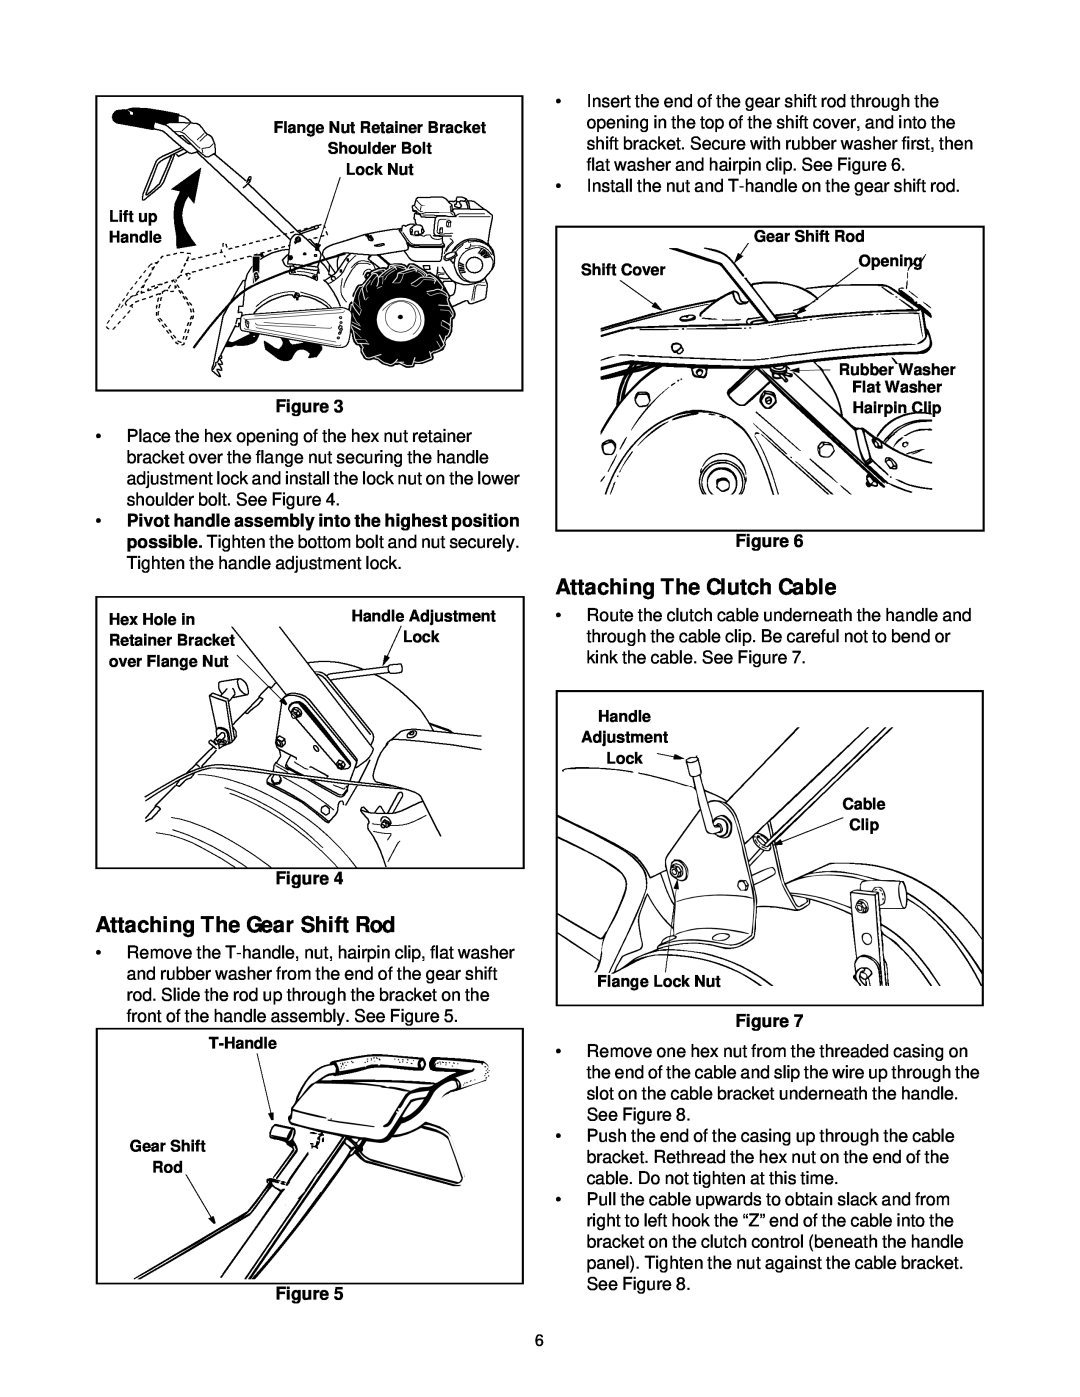 White Outdoor RB-530 manual Attaching The Clutch Cable, Attaching The Gear Shift Rod 